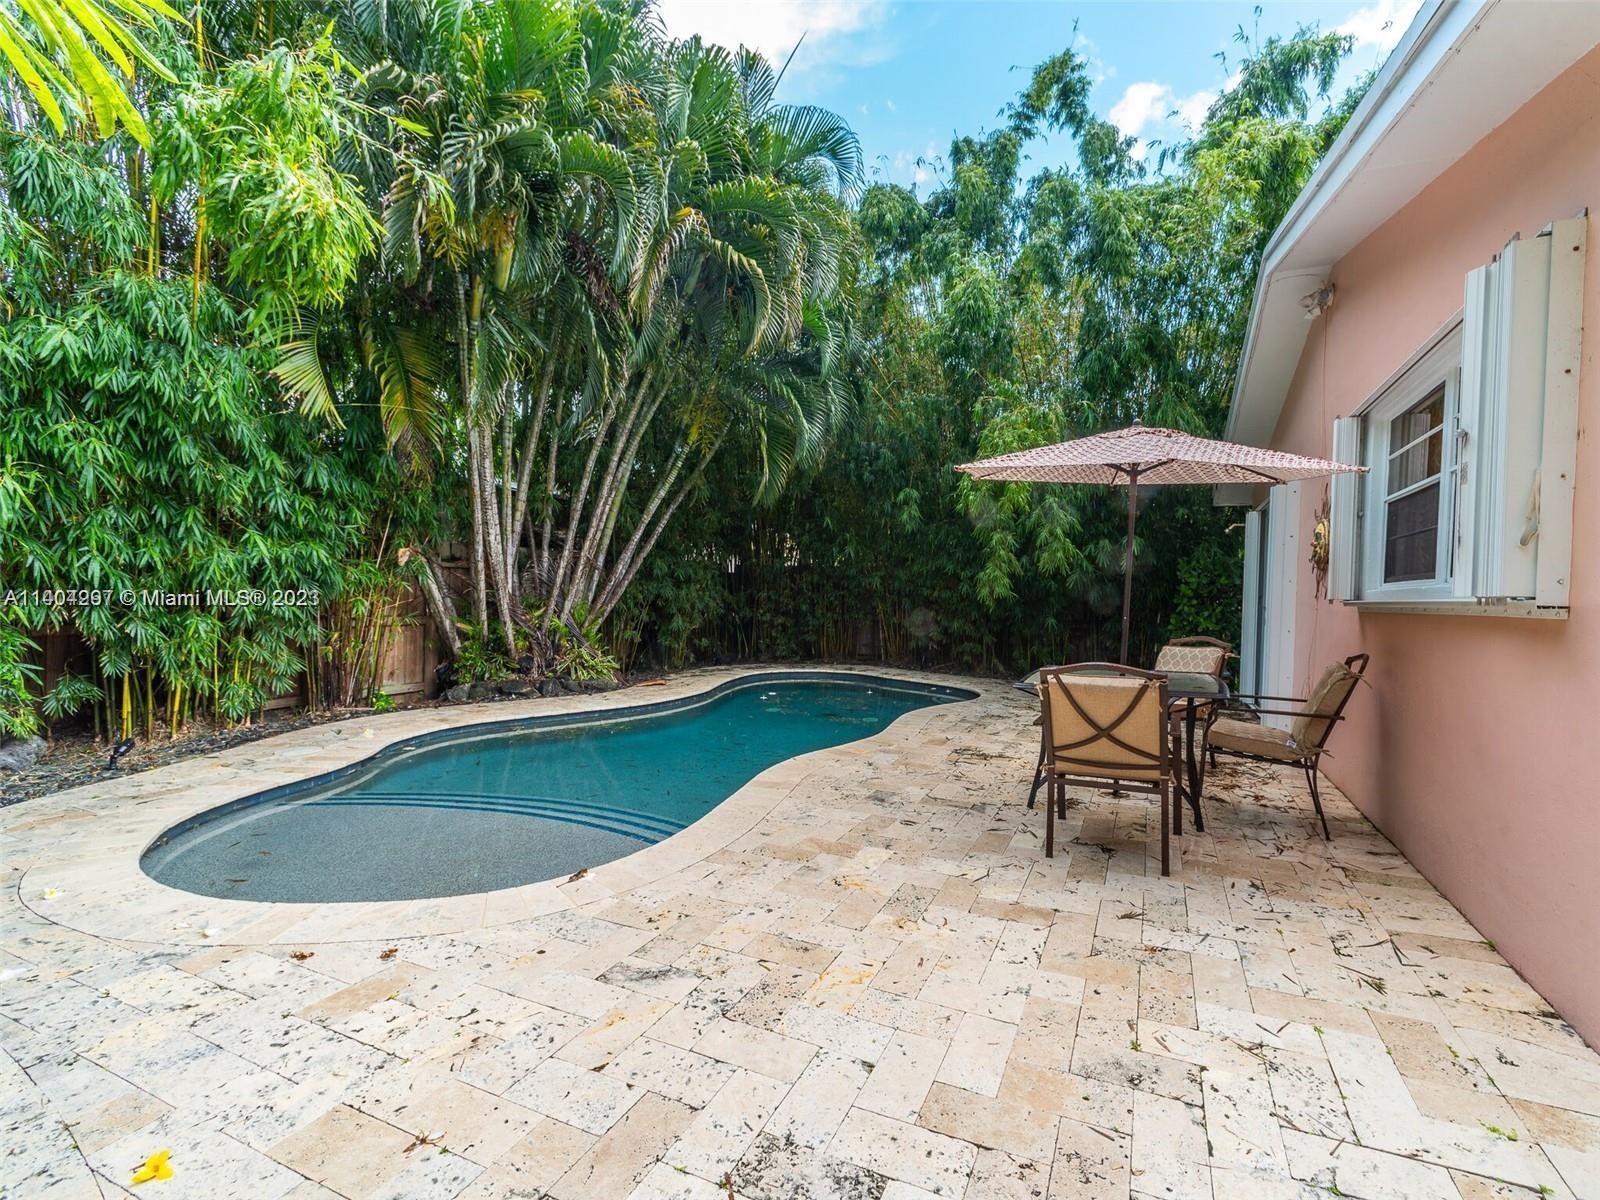 Photo of 1507 Garfield St in Hollywood, FL